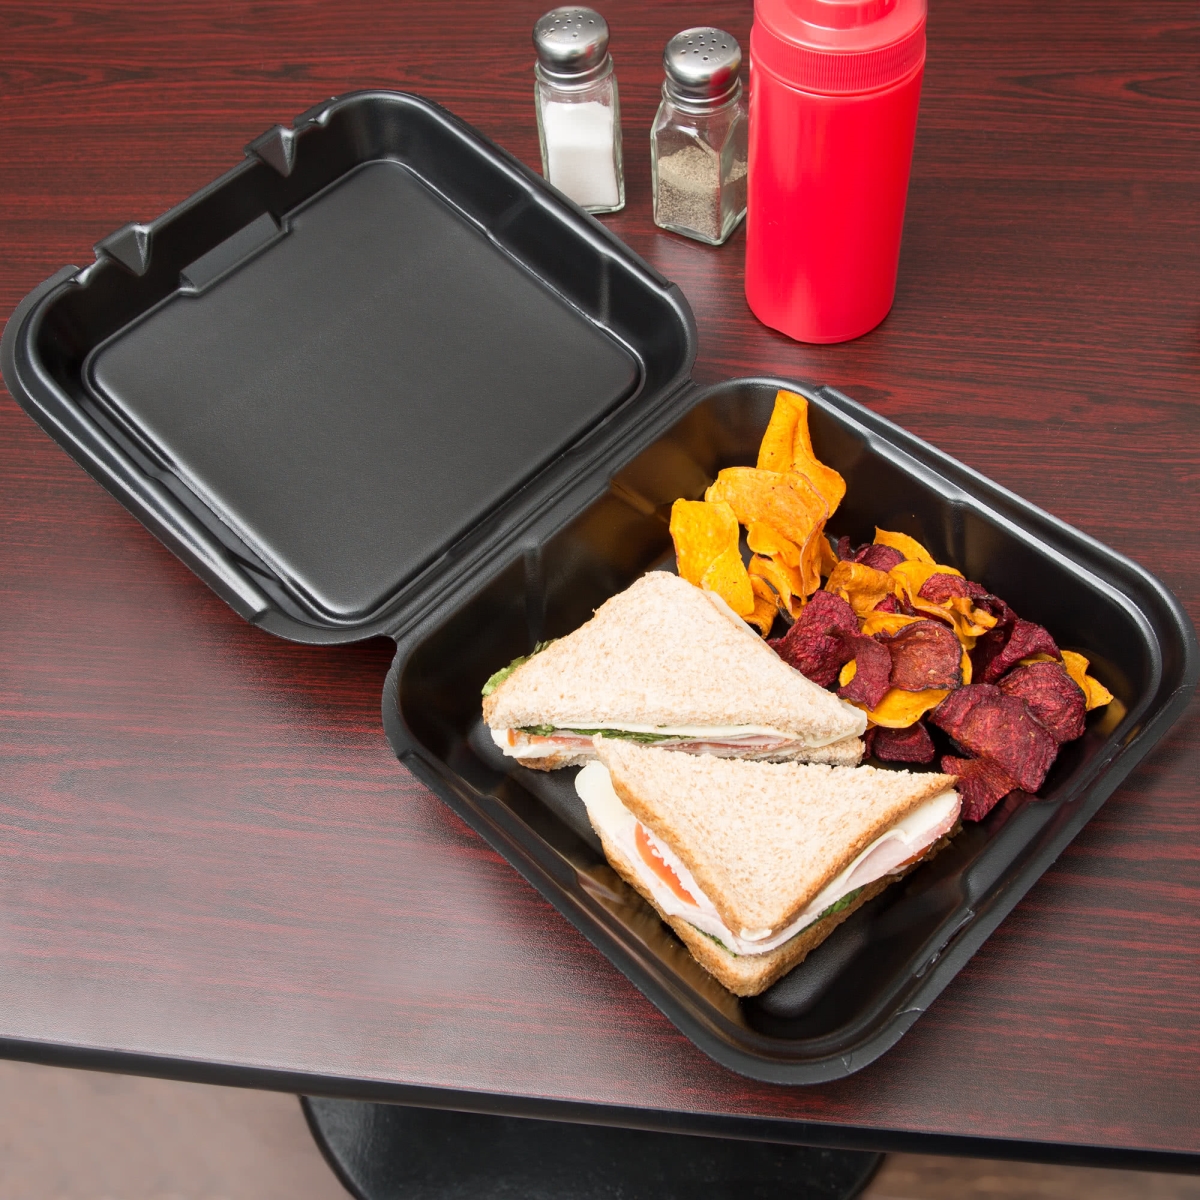 203co3l Foam Hinged Lid Container - Black